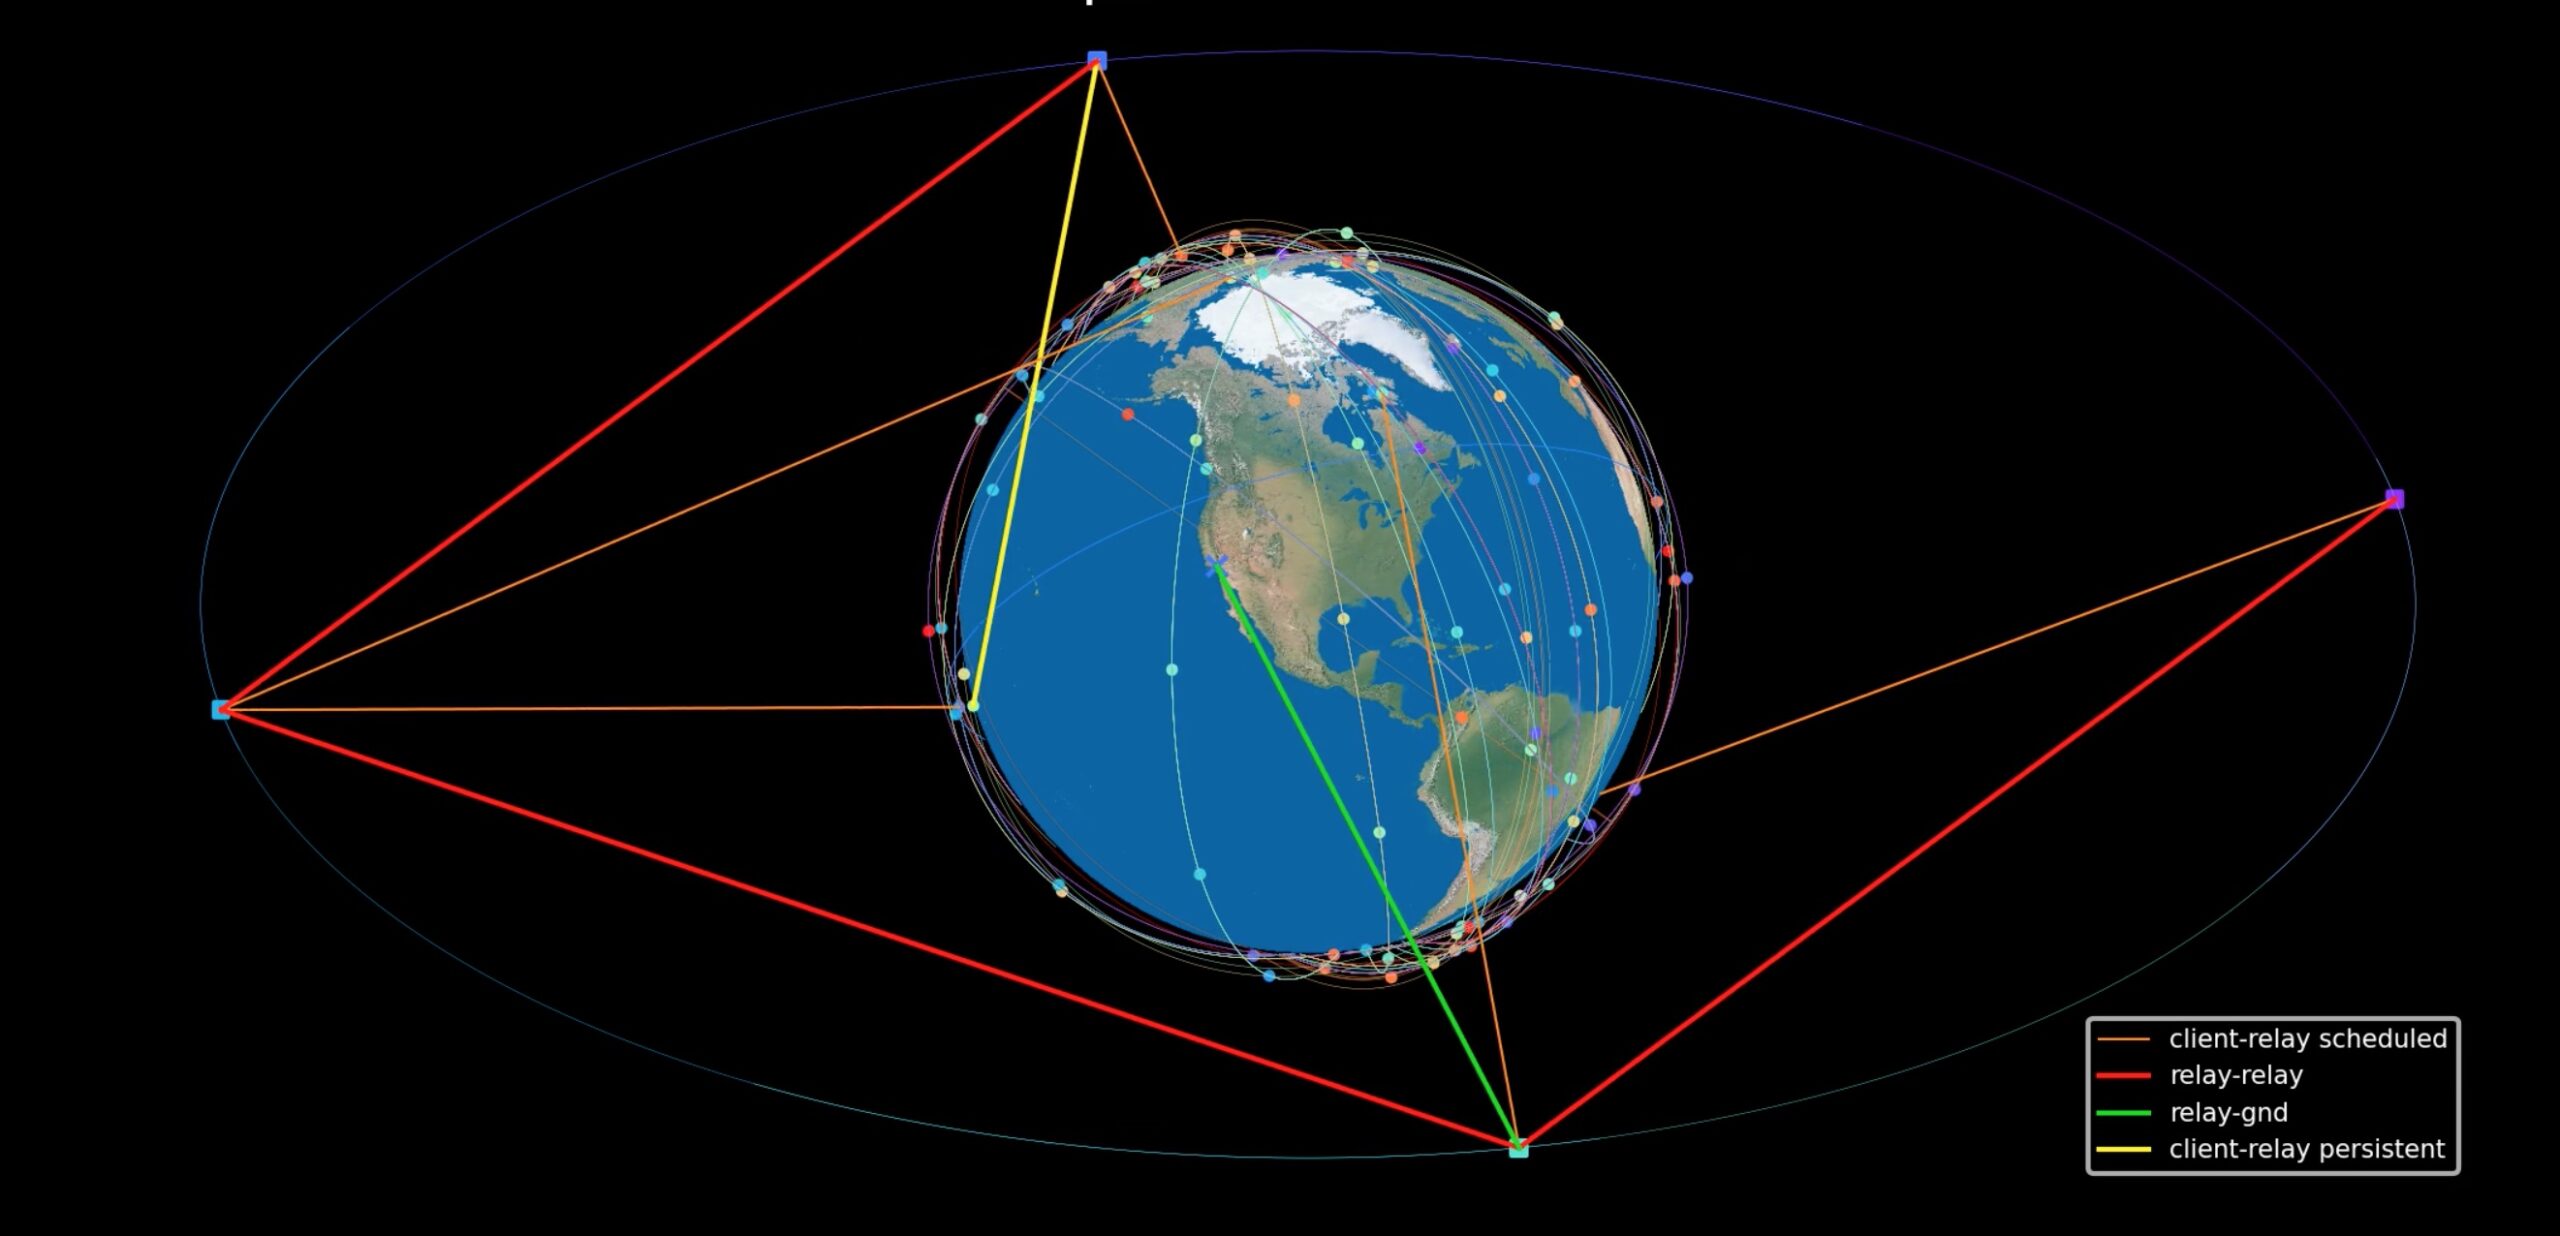 SpaceLink partners with Parsons for DARPA's inter-satellite communications  project - SpaceNews